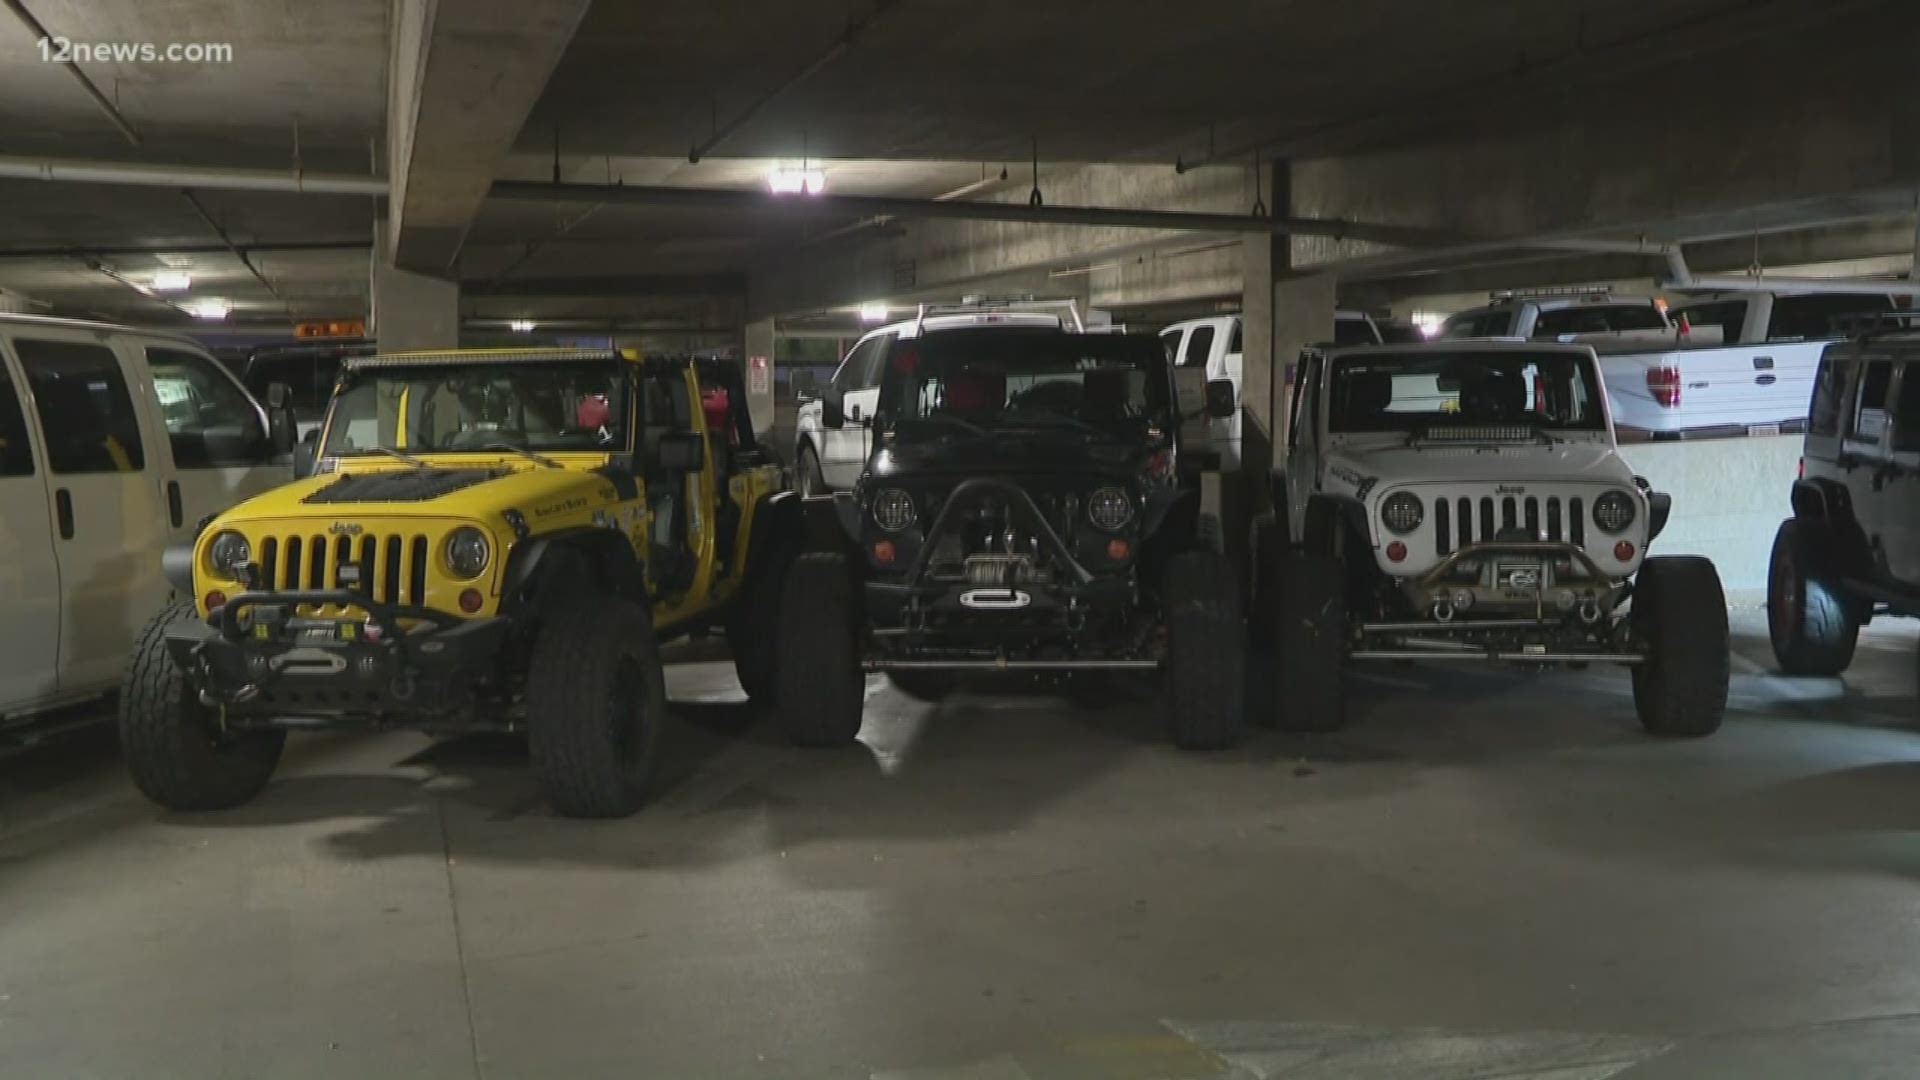 Dozens of Jeep owners gathered for a Jeep run with the Mesa Veterans Resource Center to benefit veterans.